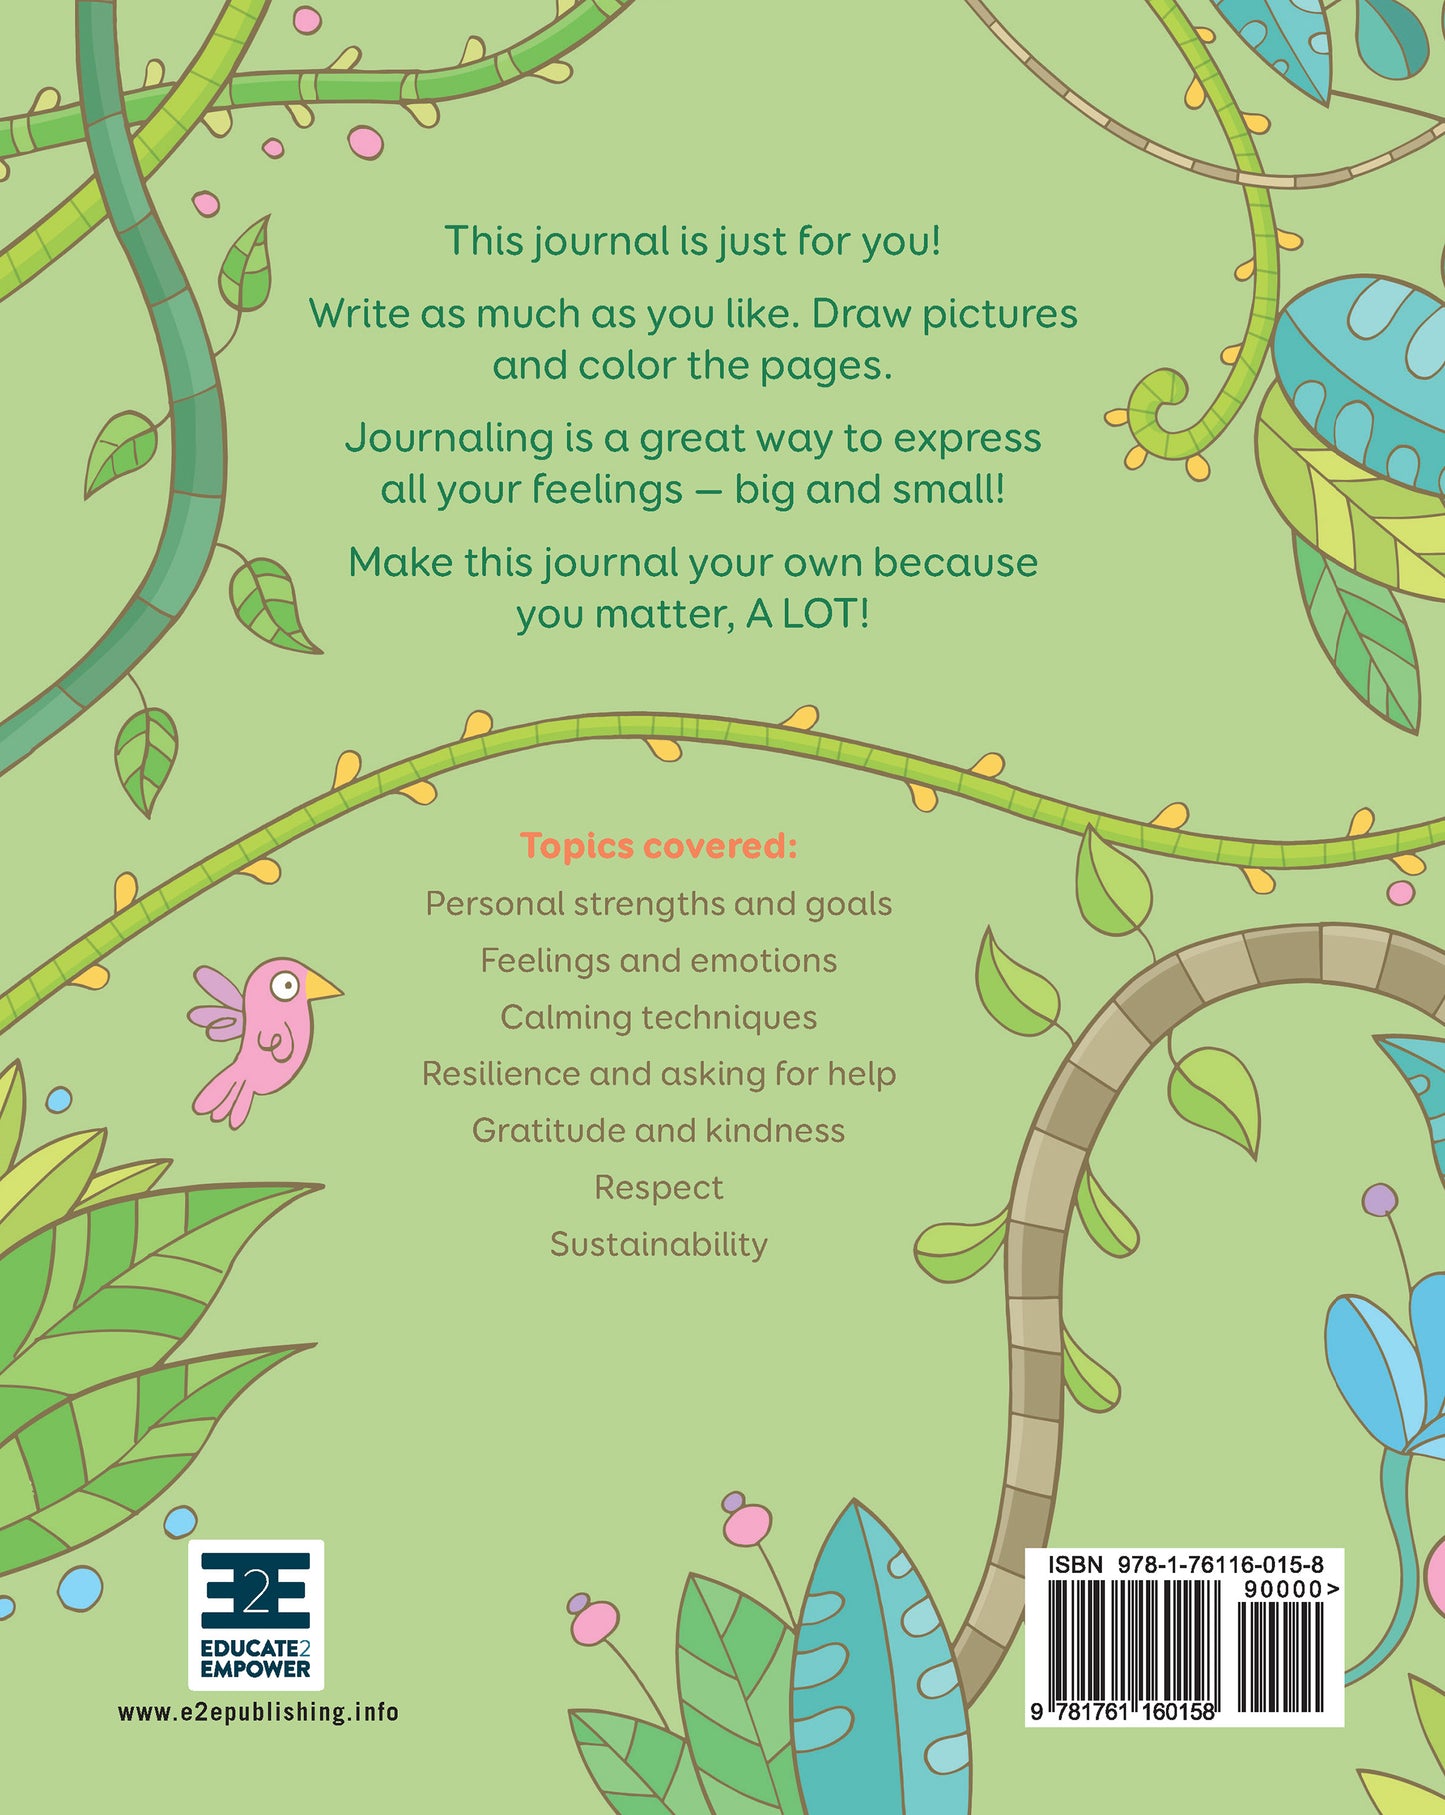 The back cover of the book ‘My Mindfulness & Well-Being Journal’